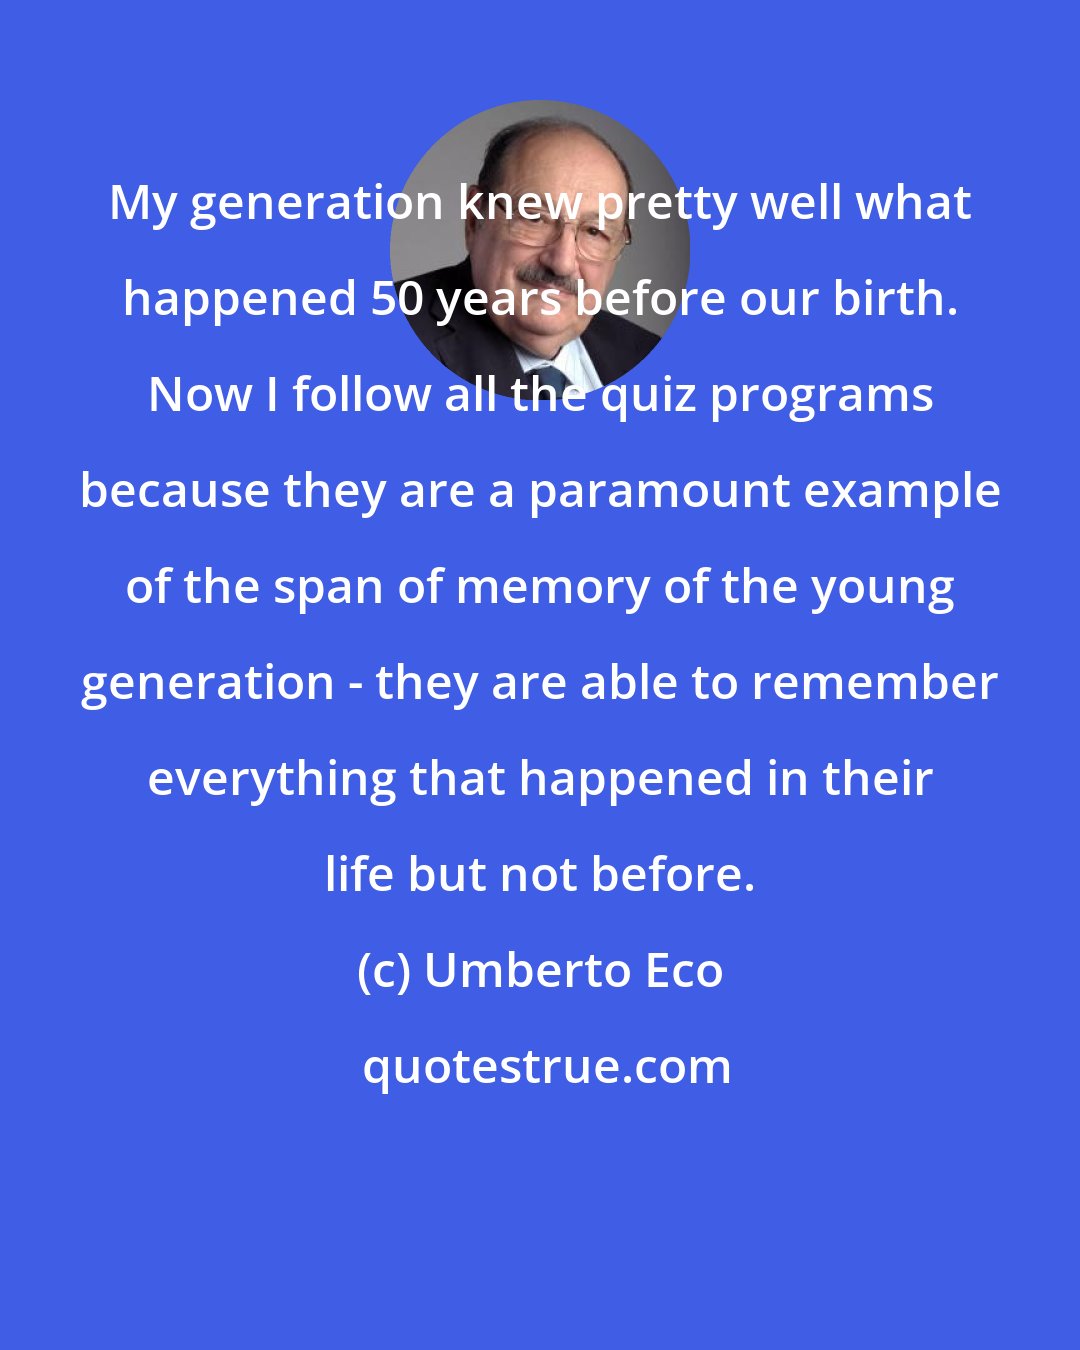 Umberto Eco: My generation knew pretty well what happened 50 years before our birth. Now I follow all the quiz programs because they are a paramount example of the span of memory of the young generation - they are able to remember everything that happened in their life but not before.